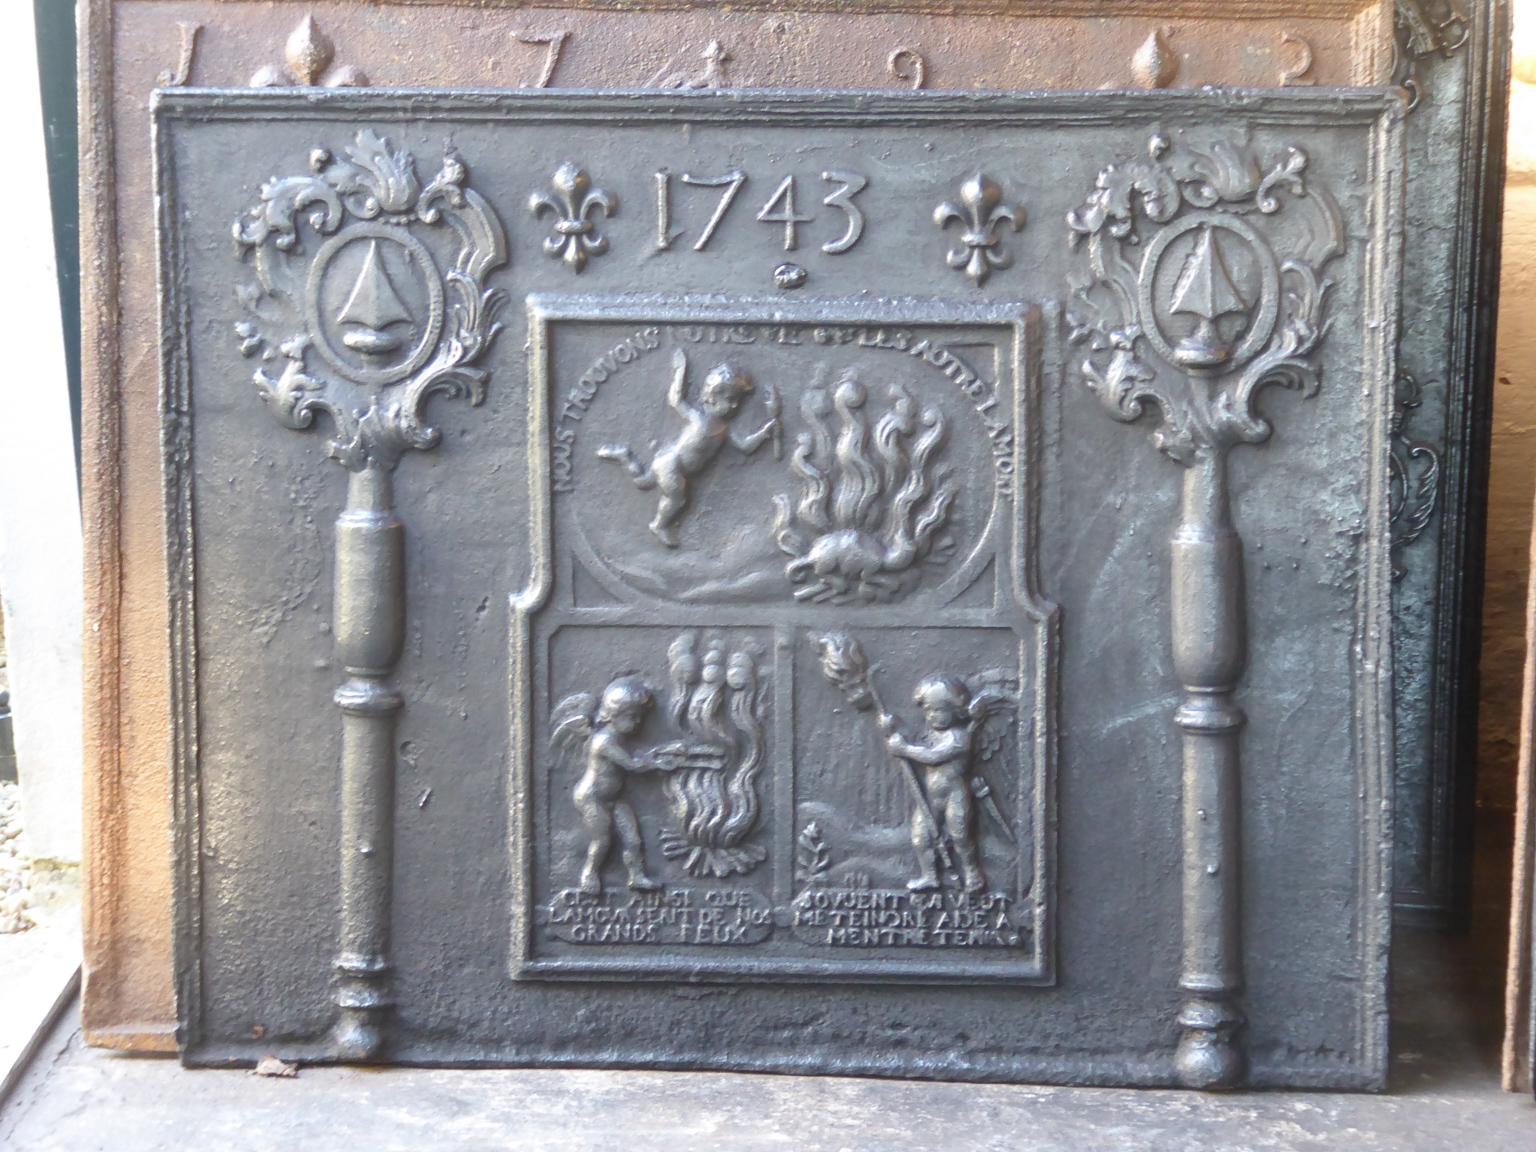 Beautiful 18th century French fireback with an Allegory of Love. The date of production of the fireback, 1743, is also cast in the fireback. The fireback is made of cast iron and has a black / pewter patina. It is in a good condition and does not